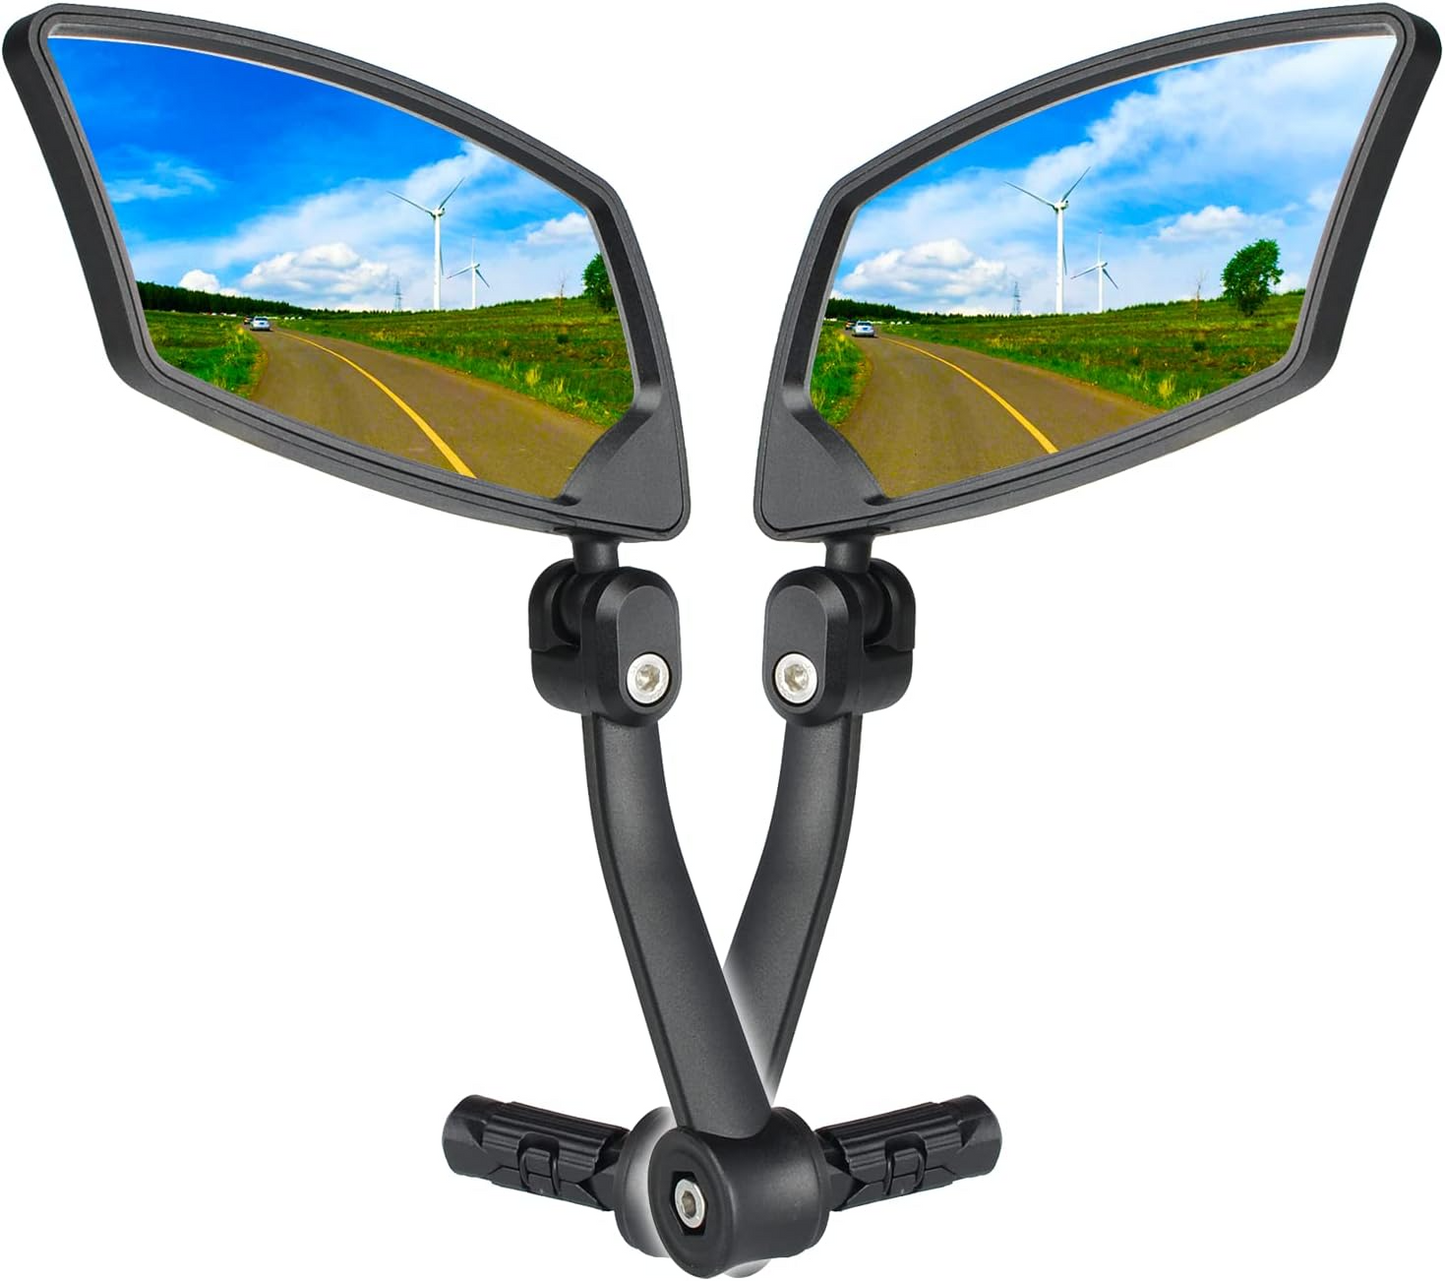 Dual motorcycle mirrors with Tampa Bay eBikes Premium Bar End Pair reflecting a scenic road with wind turbines under a blue sky.